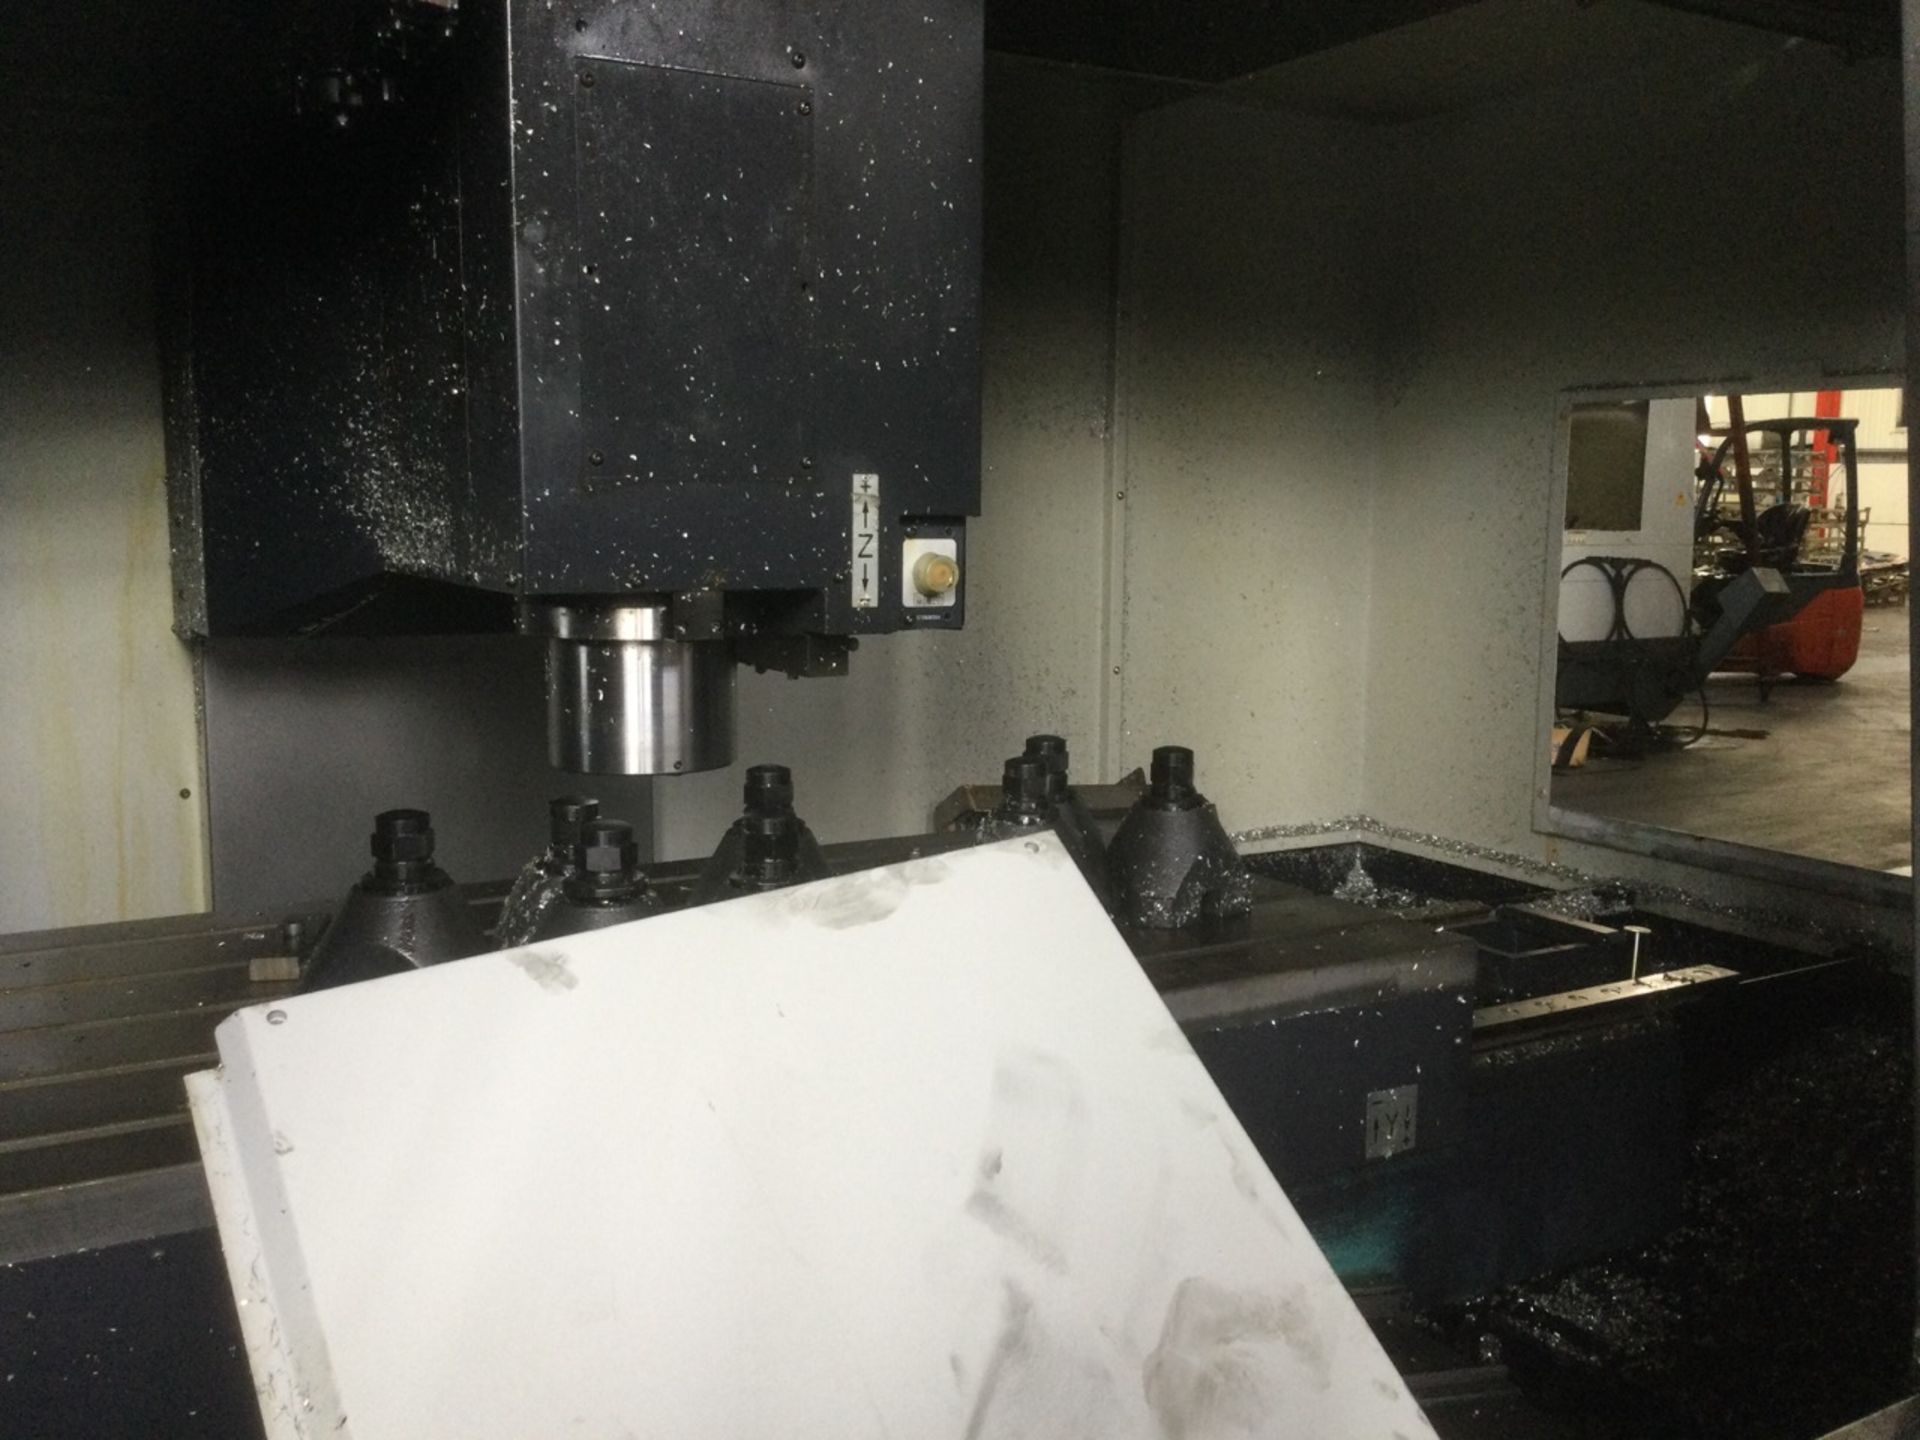 Doosan DNM 6700 3-Axis Vertical Machining Centre With Fanuc I-Series Control - Image 2 of 6